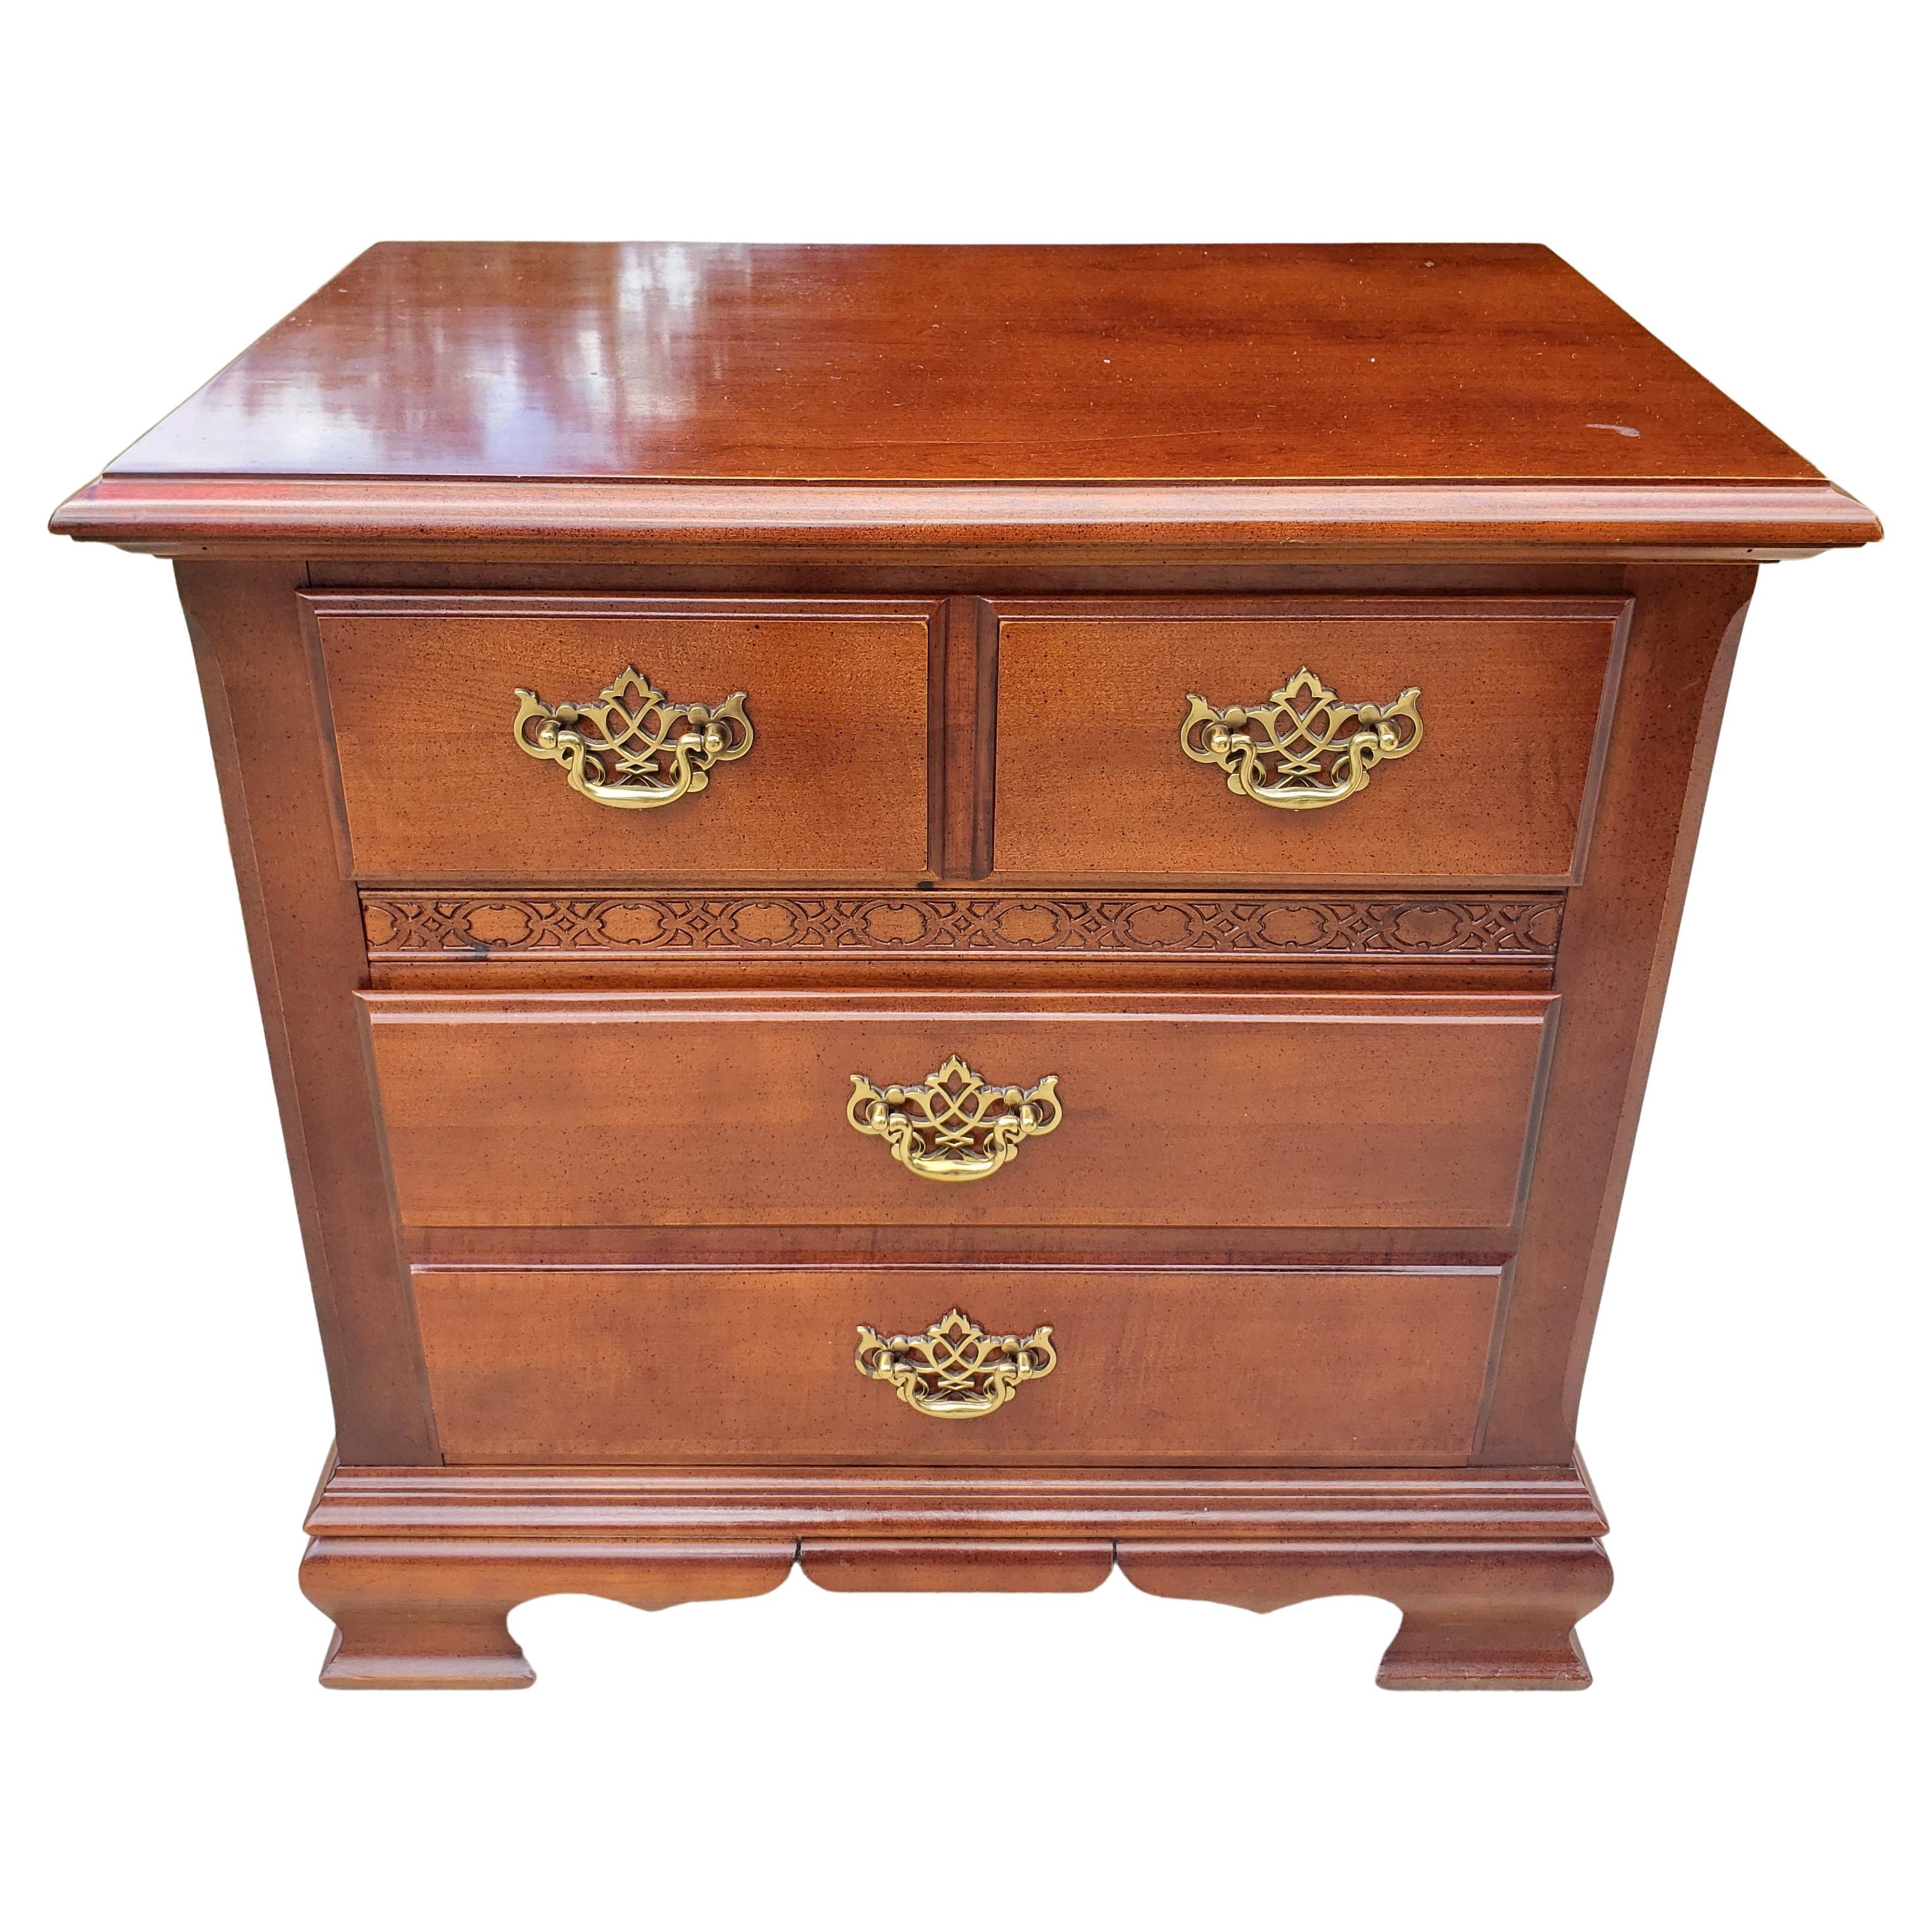 Stanley Furniture Chippendale Mahogany Bedside Tables Nightstands, a Pair In Good Condition For Sale In Germantown, MD